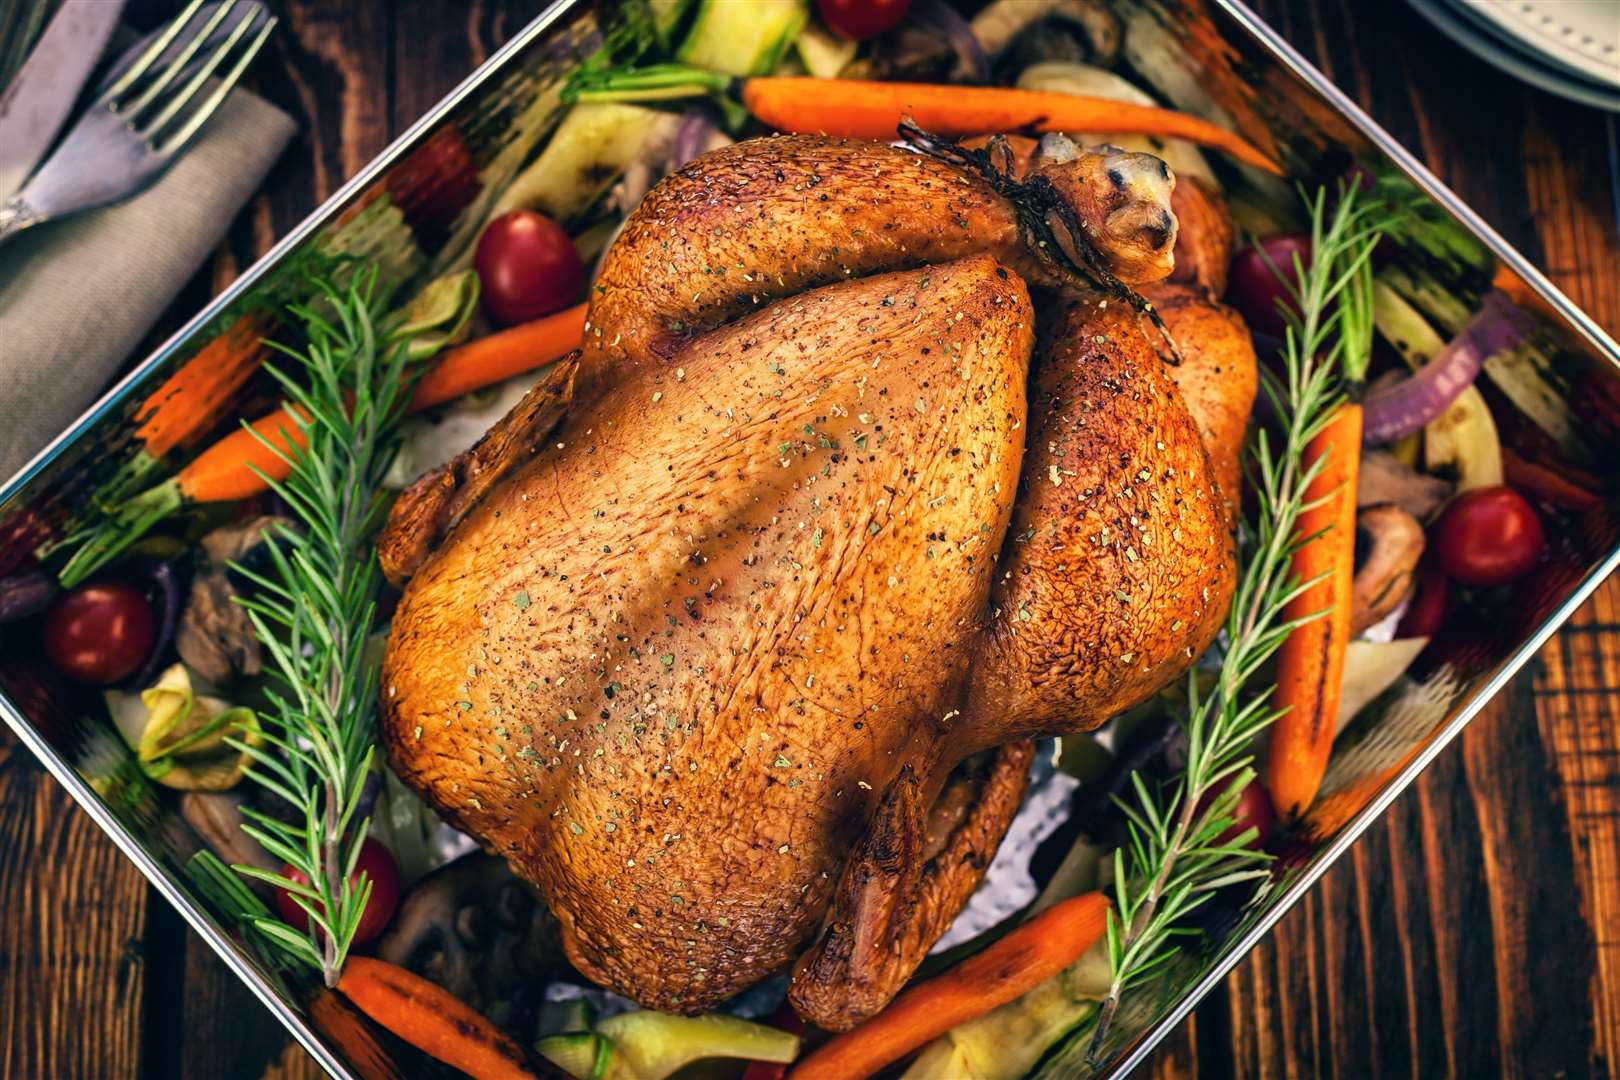 There's still time to pick up a turkey with all the trimmings. Picture: iStock